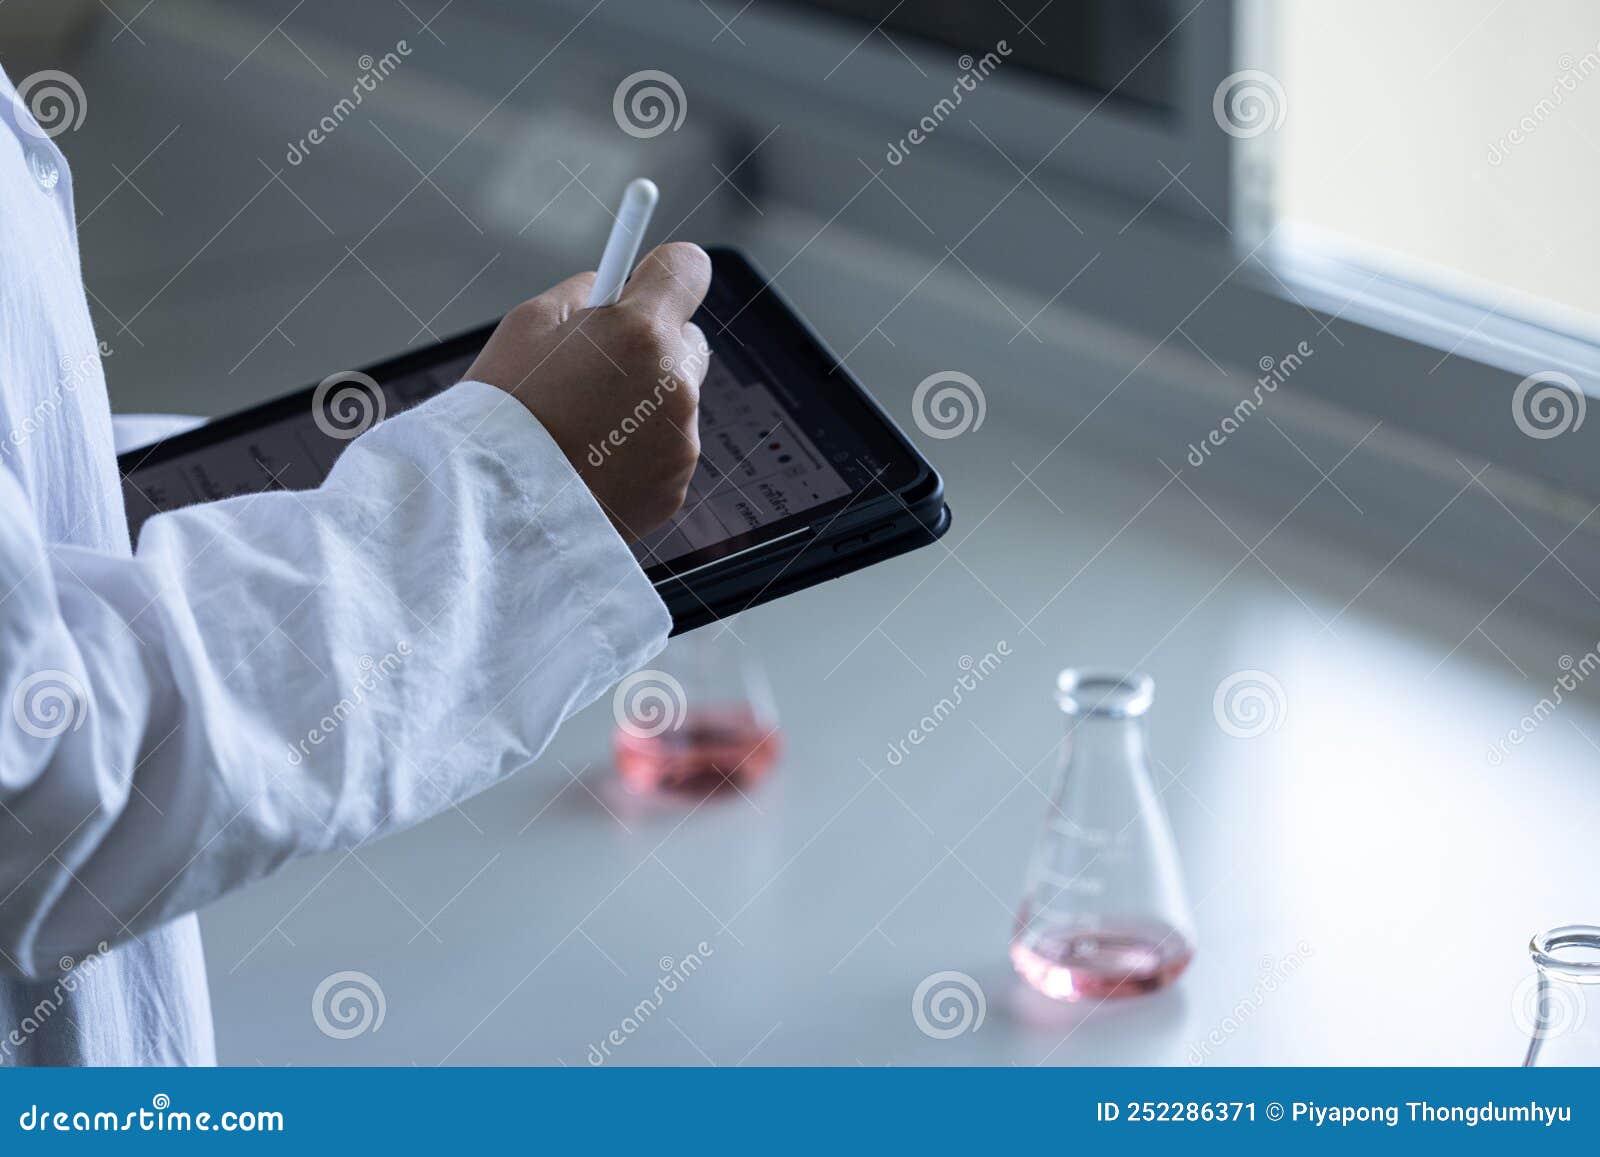 Biochemistry Study in the Laboratory. Stock Image - Image of care ...